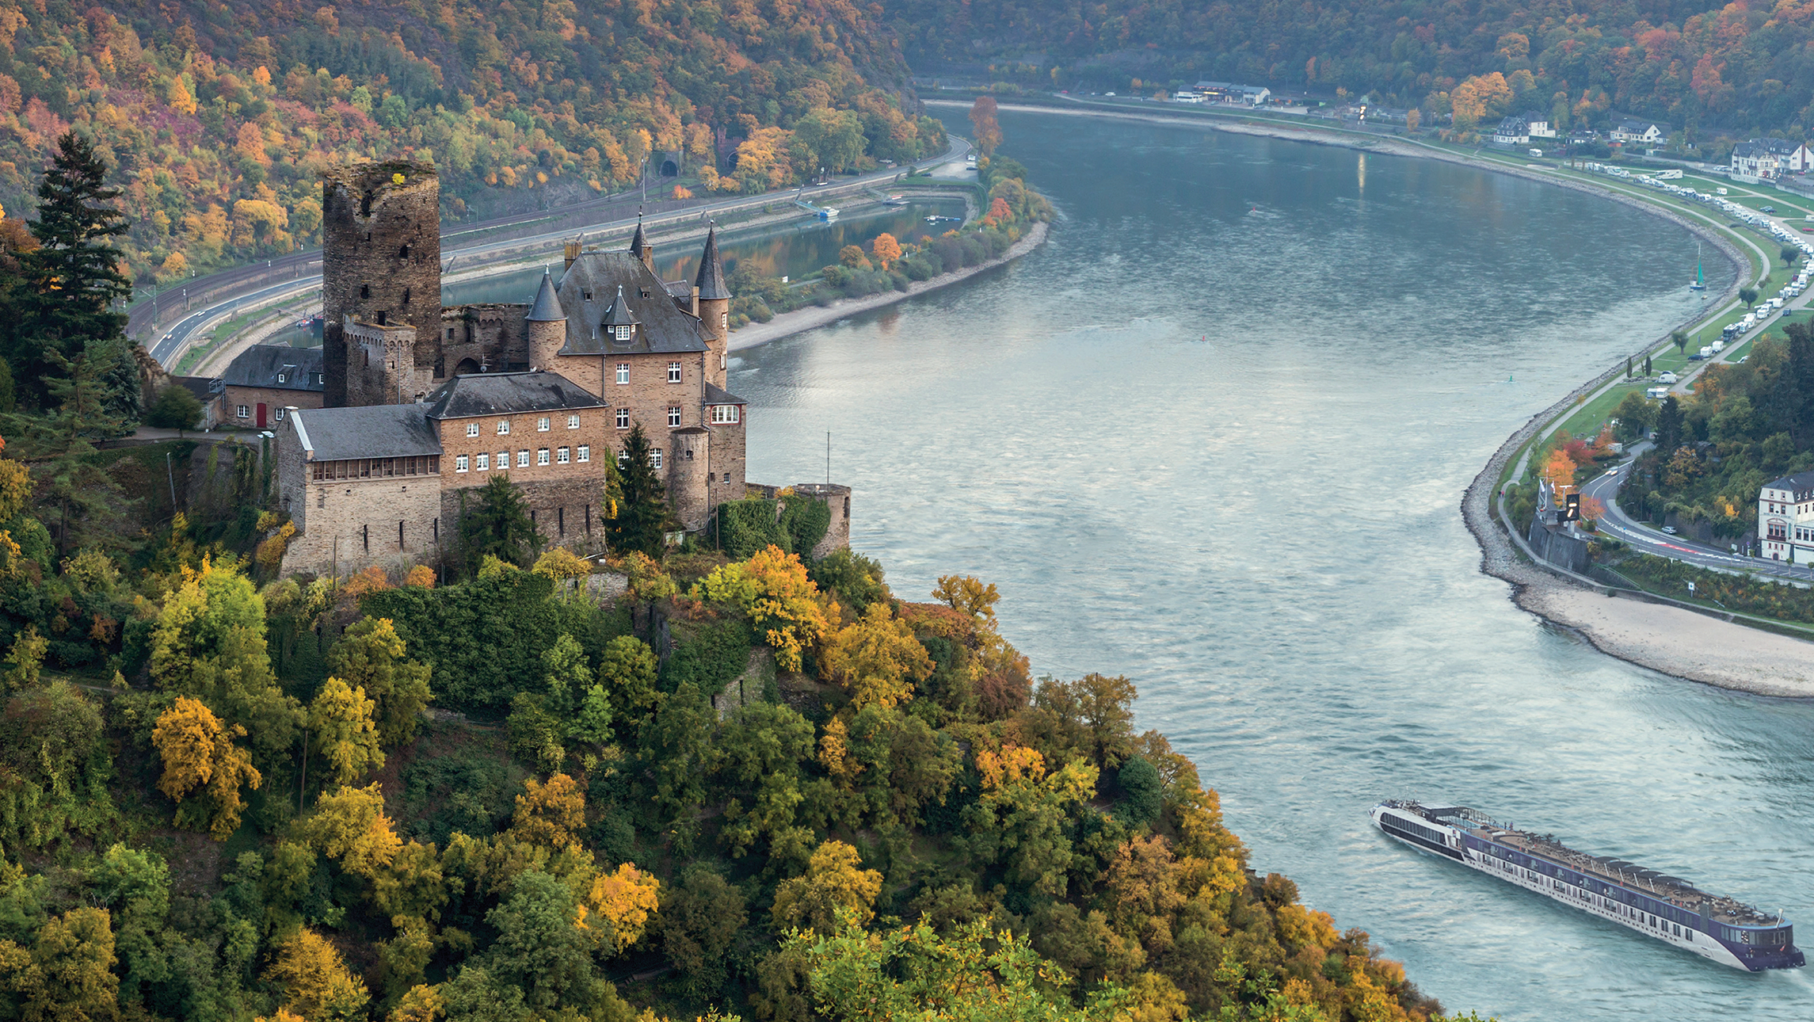 An APT ship sailing down the Rhine with a castle and forest